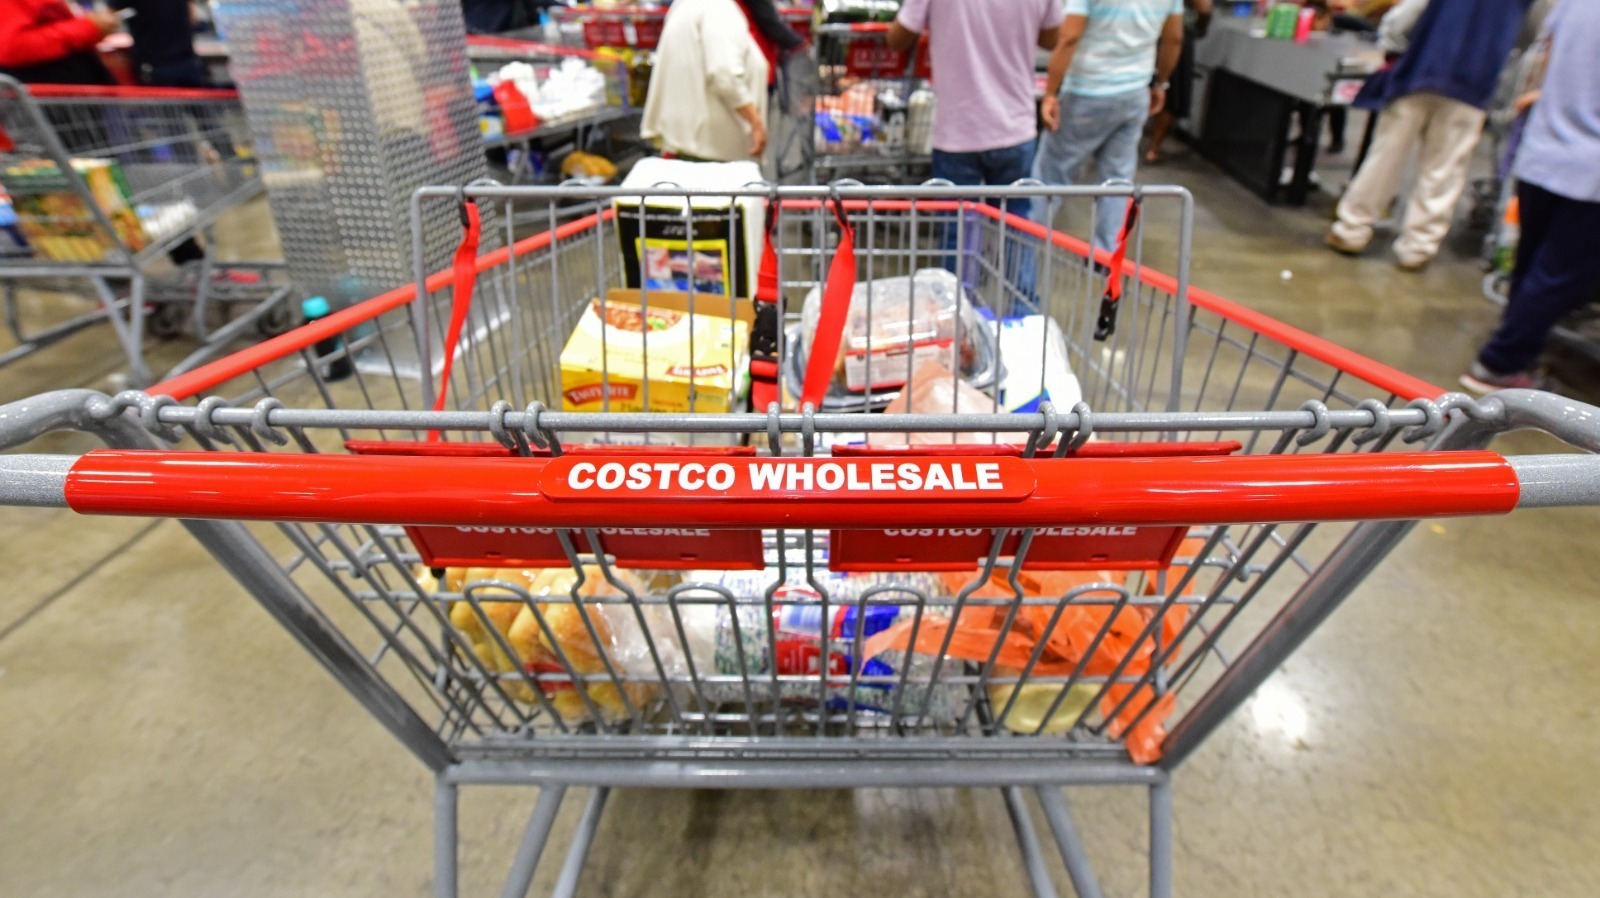 1. "Costco Reddit" - A subreddit dedicated to discussing all things Costco, including discounts and deals - wide 7